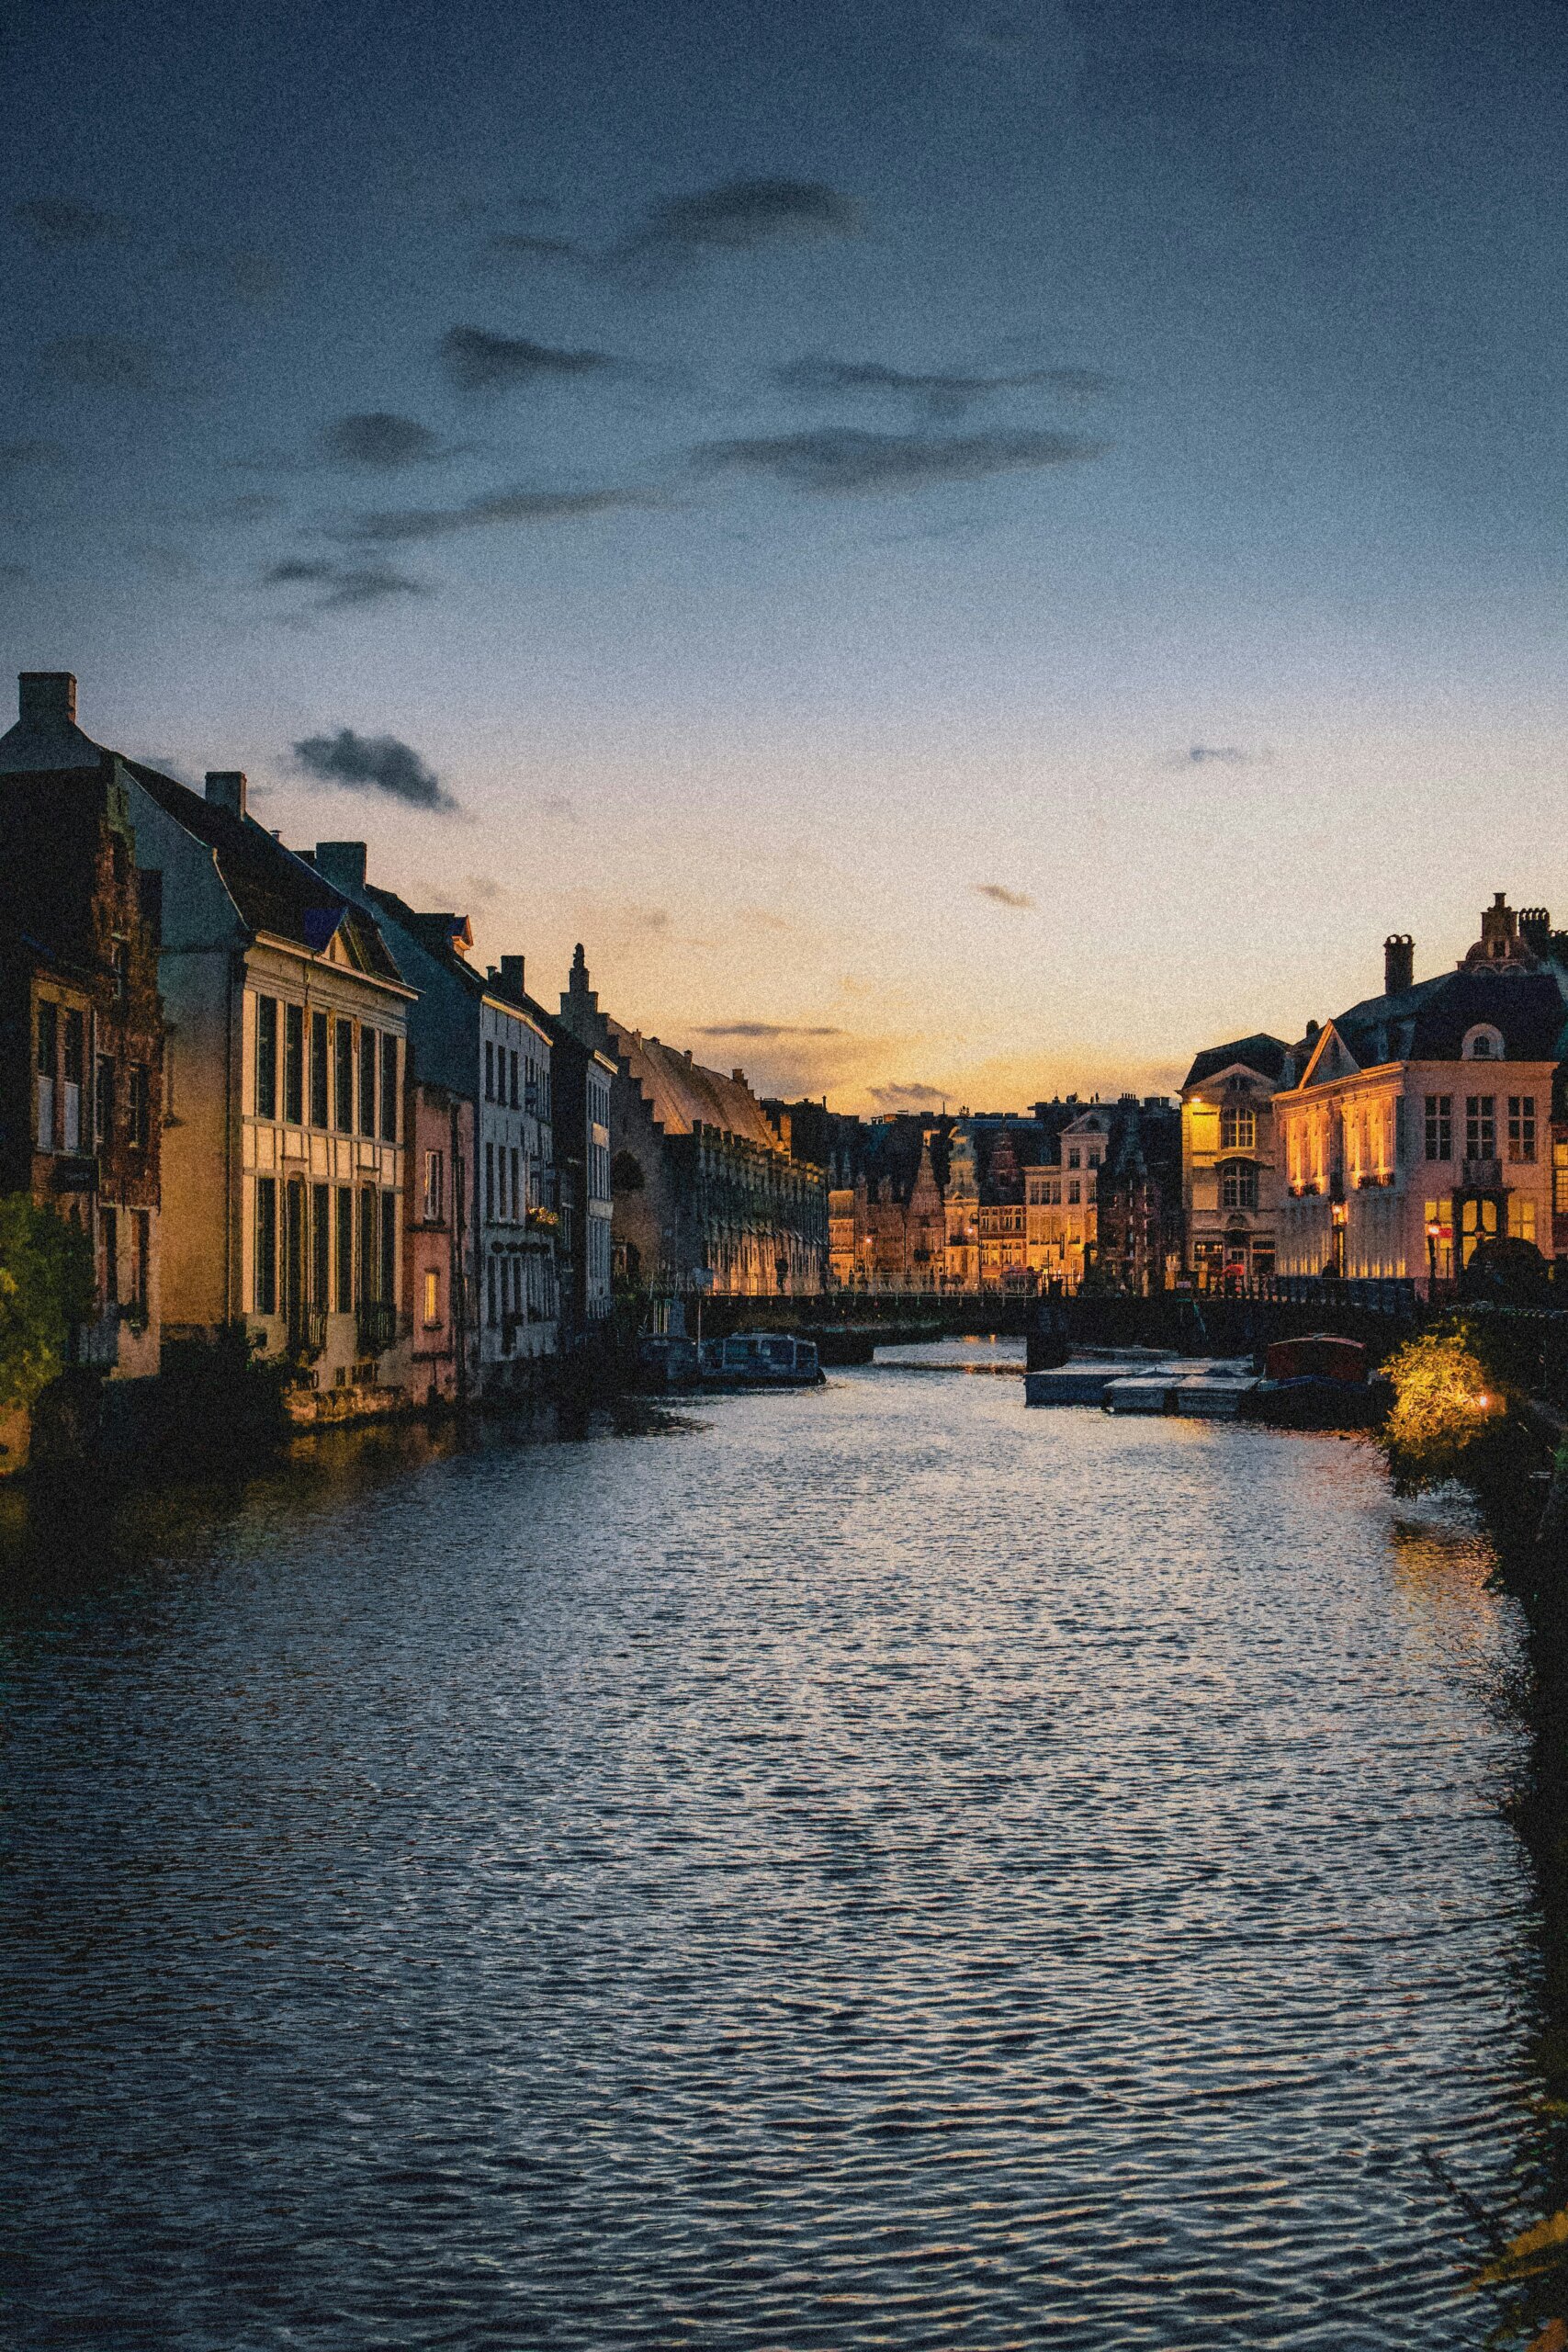 GHENT